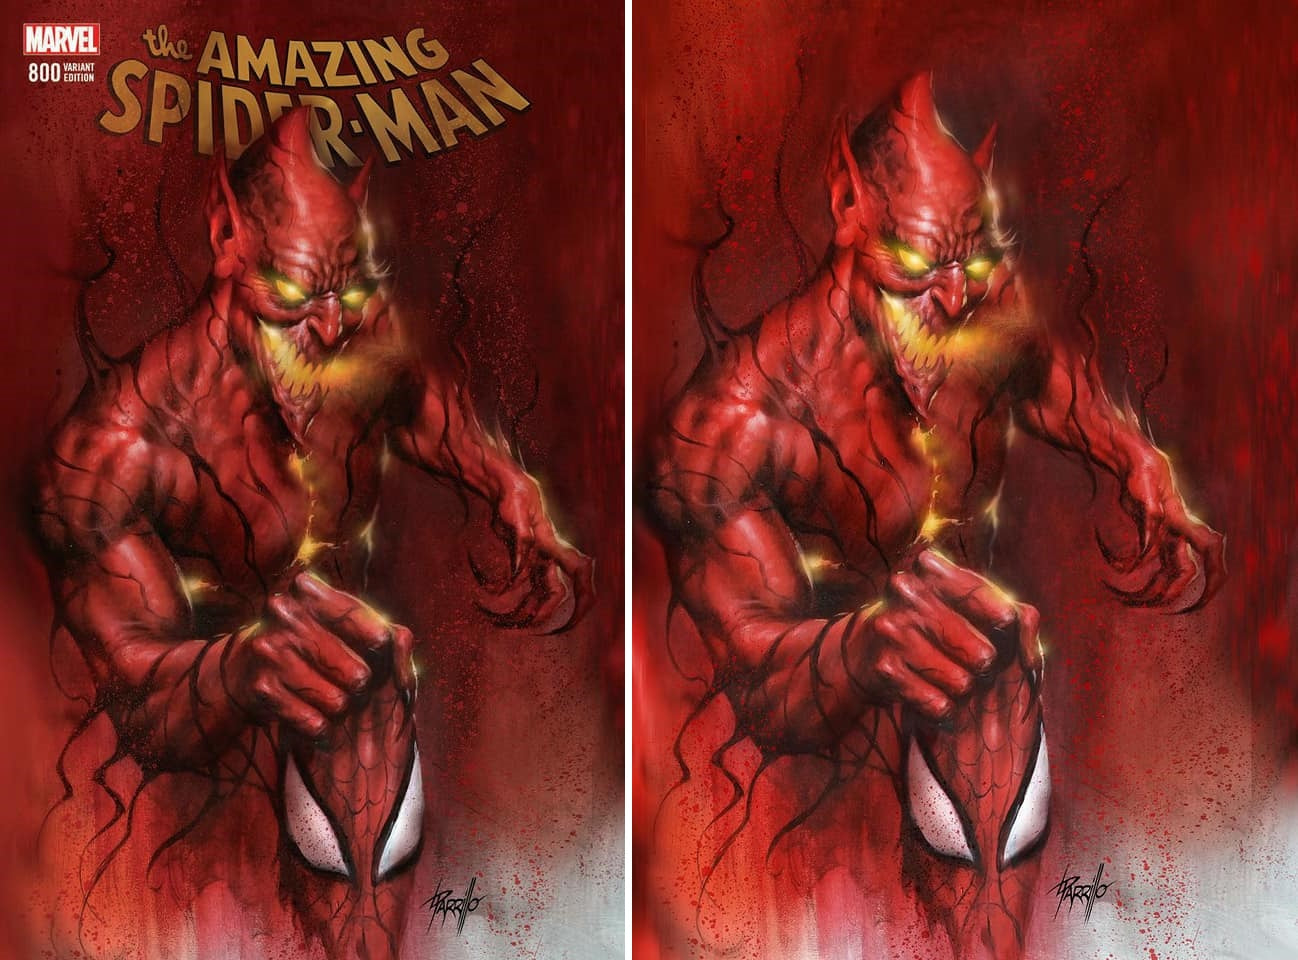 AMAZING SPIDER-MAN #800 LUCIO PARRILLO RED GOBLIN TRADE/VIRGIN VARIANT SET LIMITED TO 700